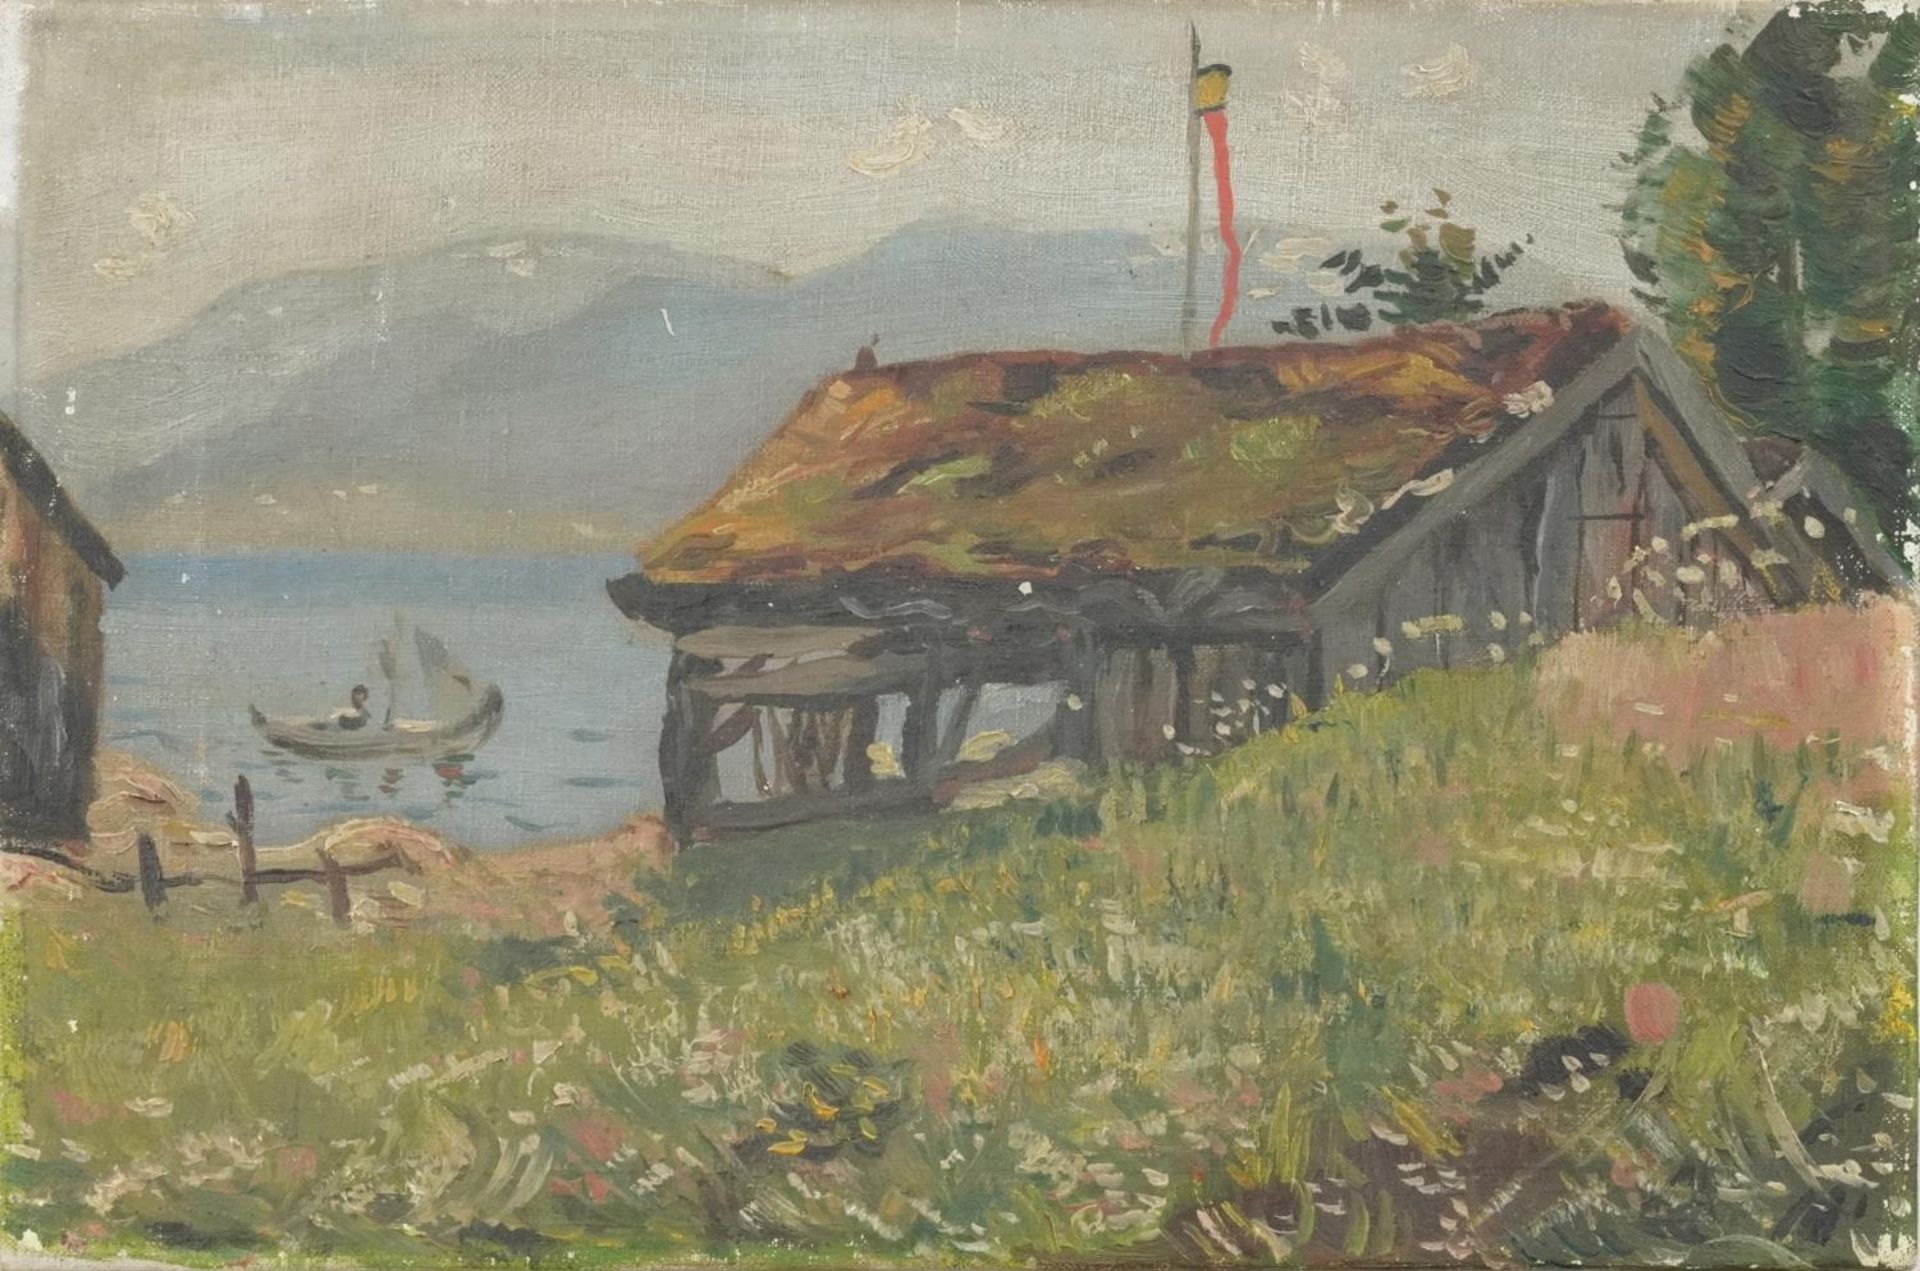 Attributed to Hans Dahl - Balestrand lake scene, late 19th/early 20th century Norwegian school oil